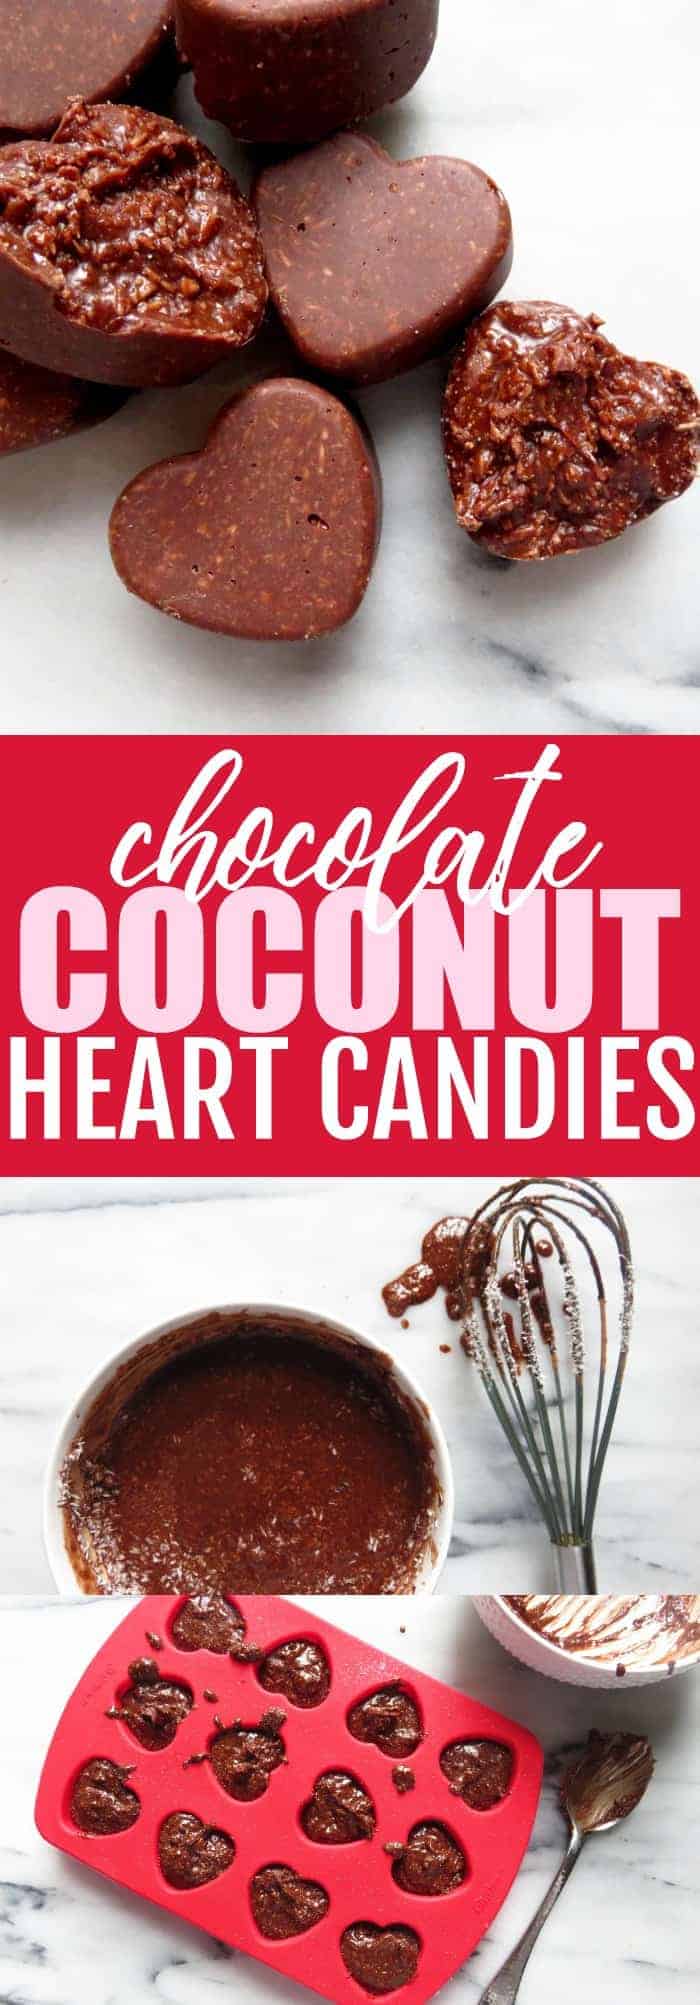 Chocolate Coconut Heart Candies - The Toasted Pine Nut